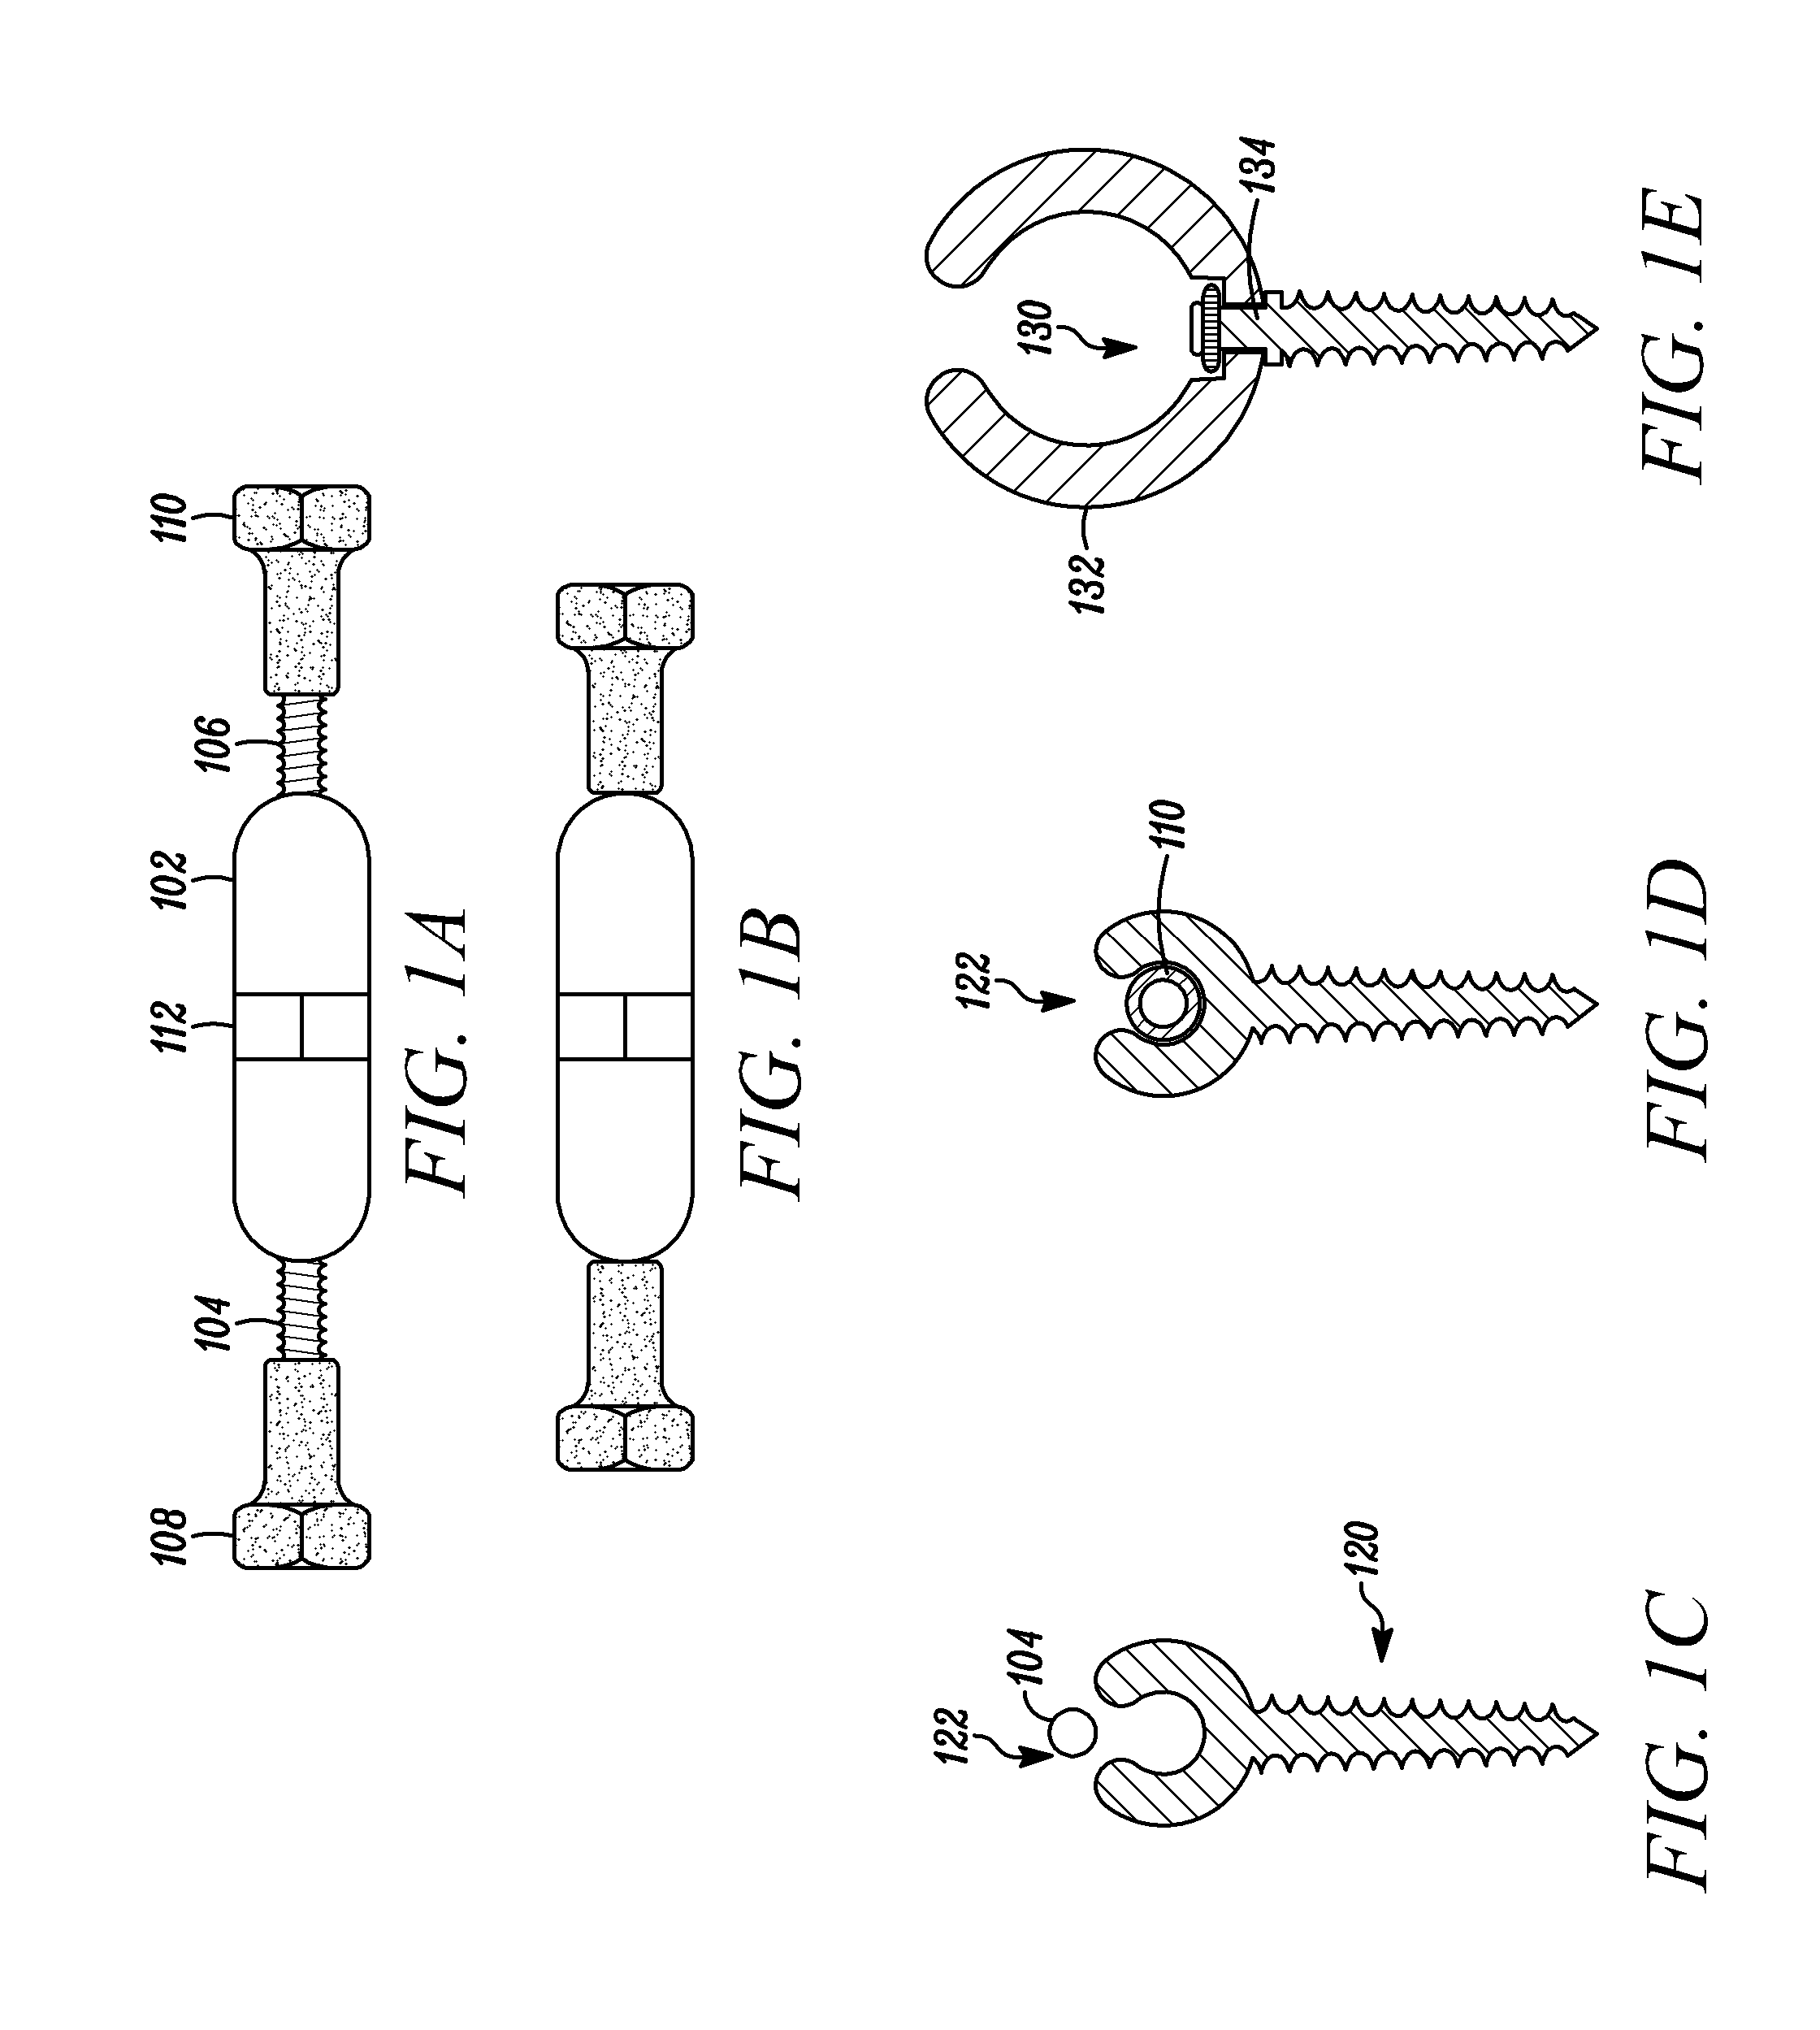 Methods and Apparatus for Treating Spinal Stenosis